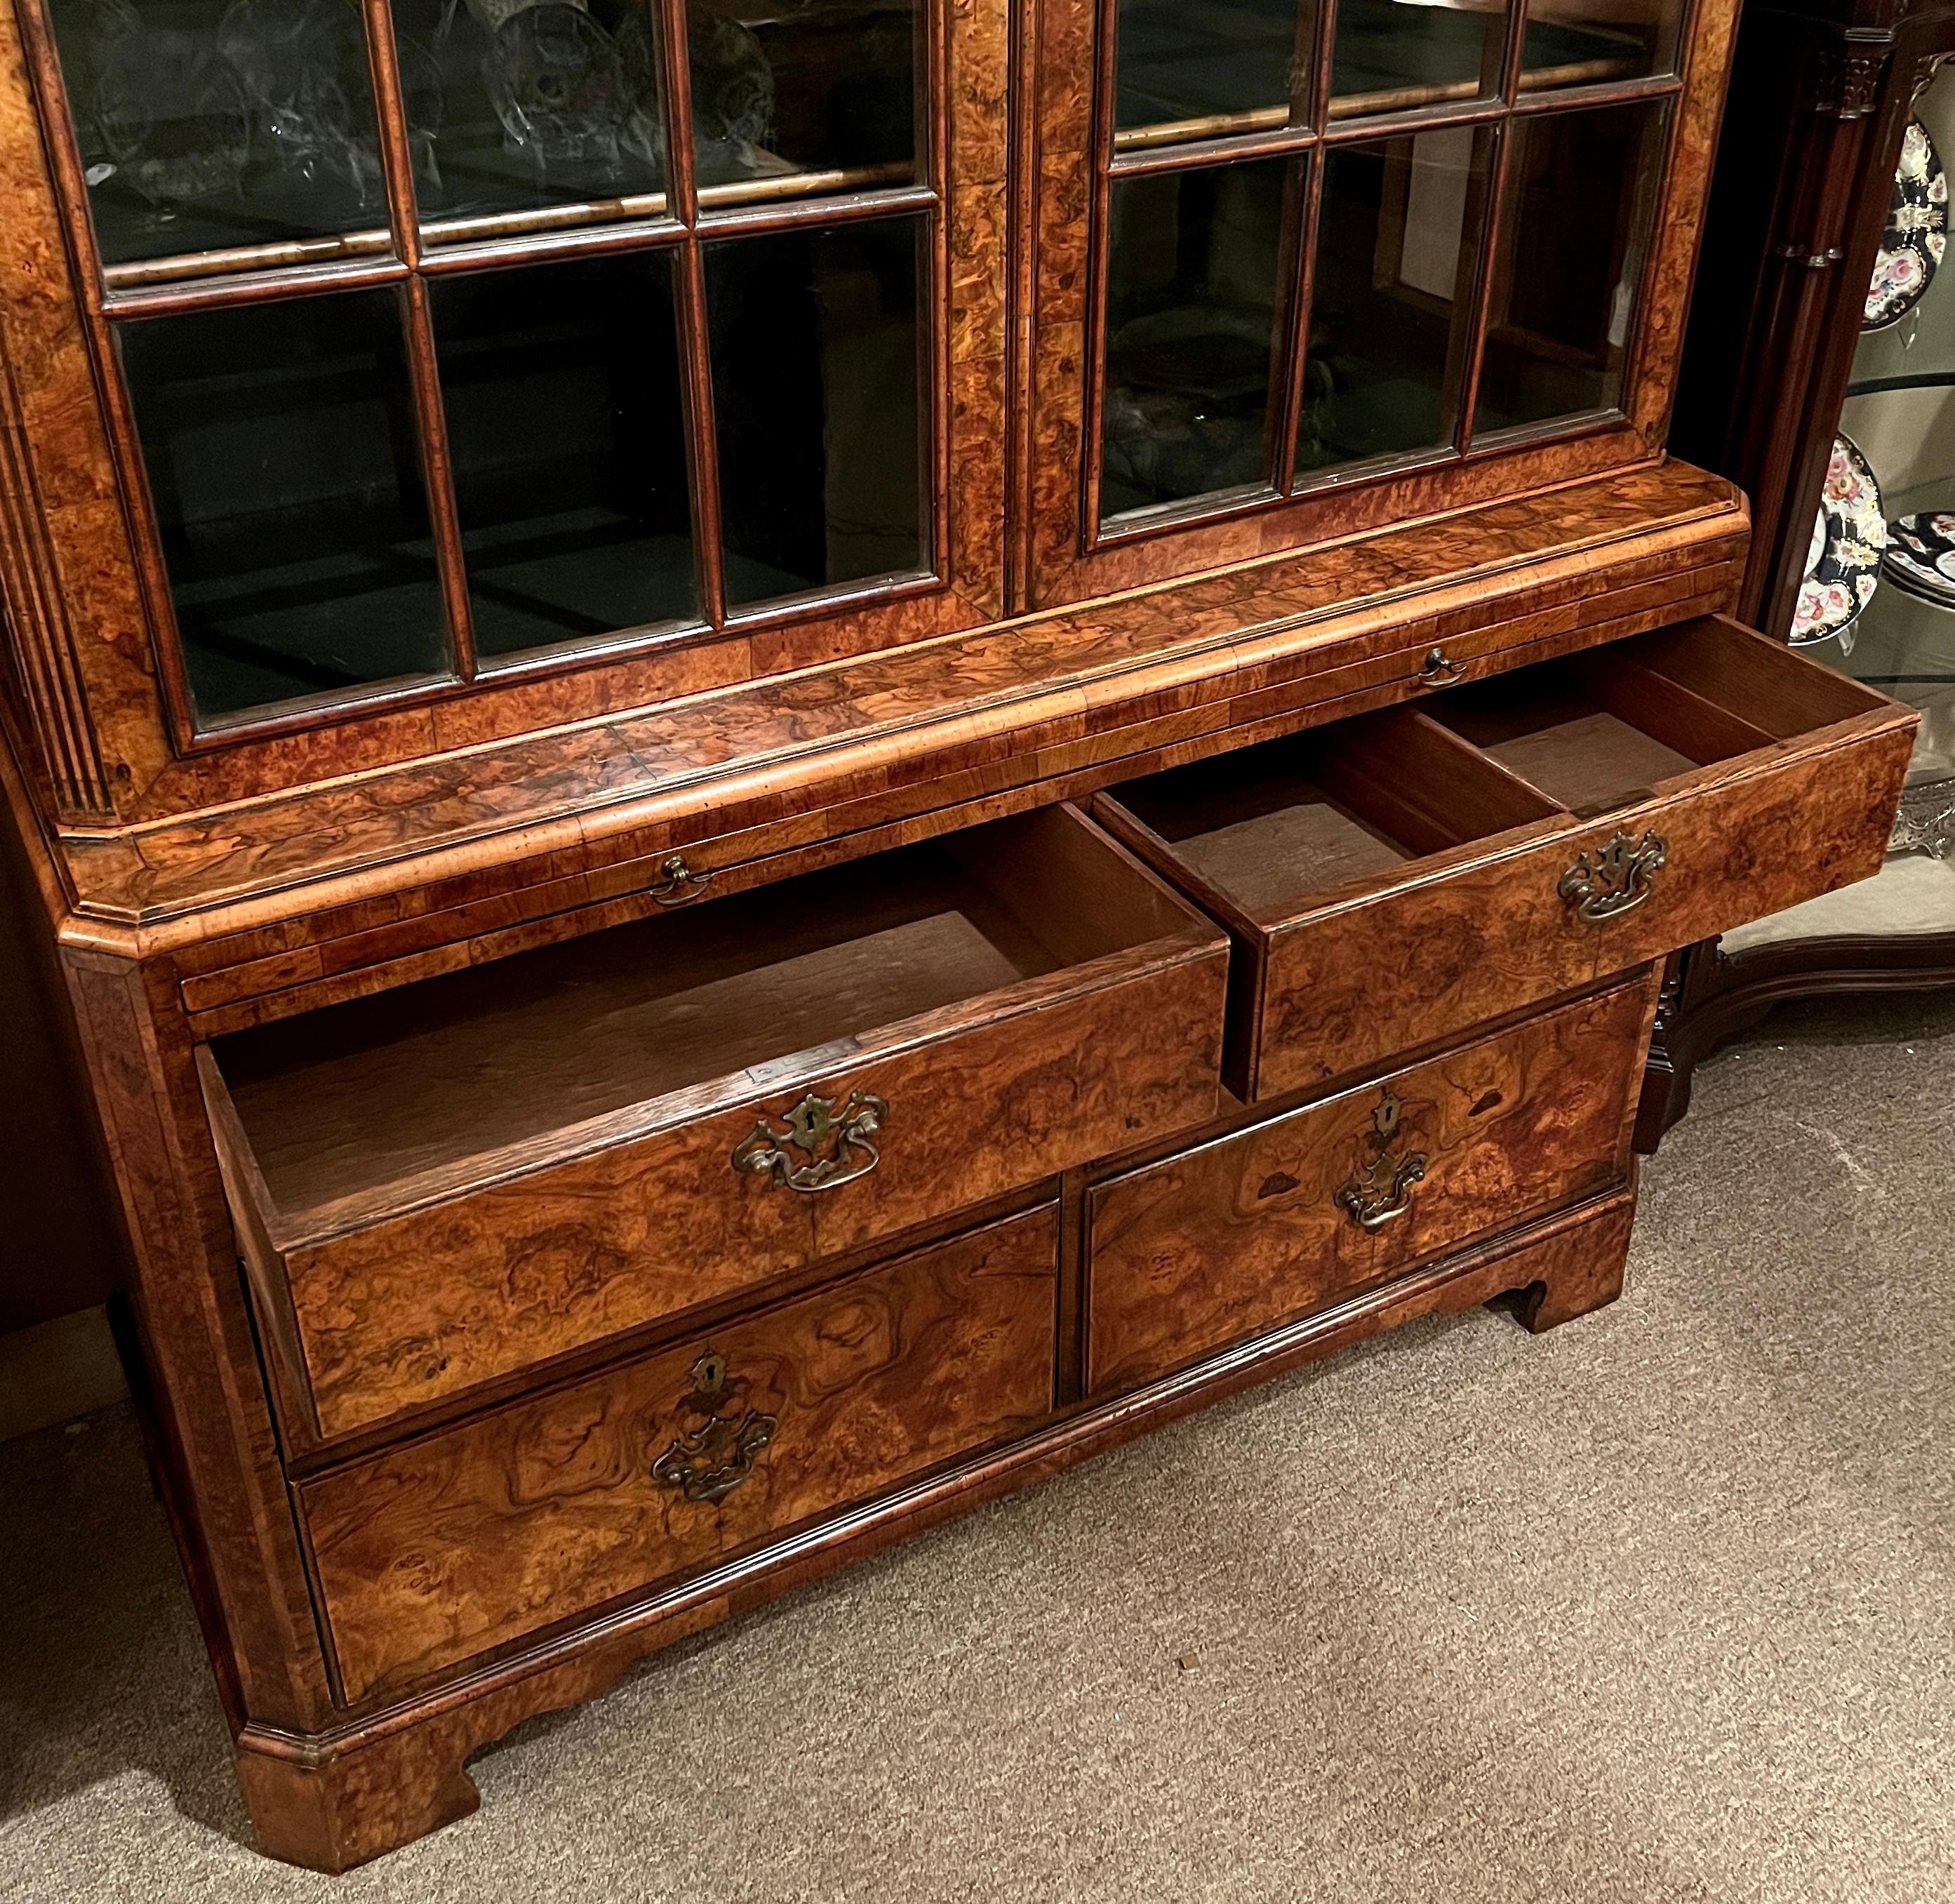 19th Century Antique English Burled Walnut Glass Front Cabinet with Writing Slide, Circa 1880 For Sale